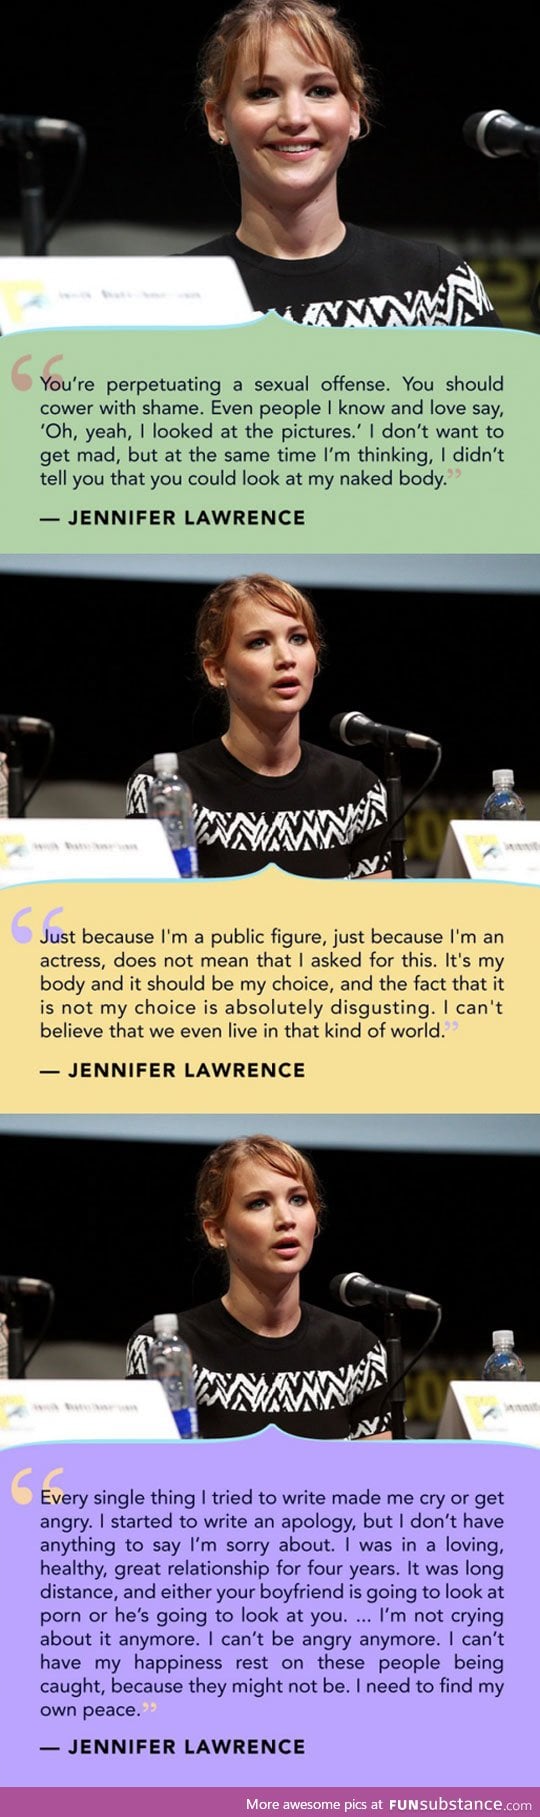 Jennifer lawrence talks about her nude photos